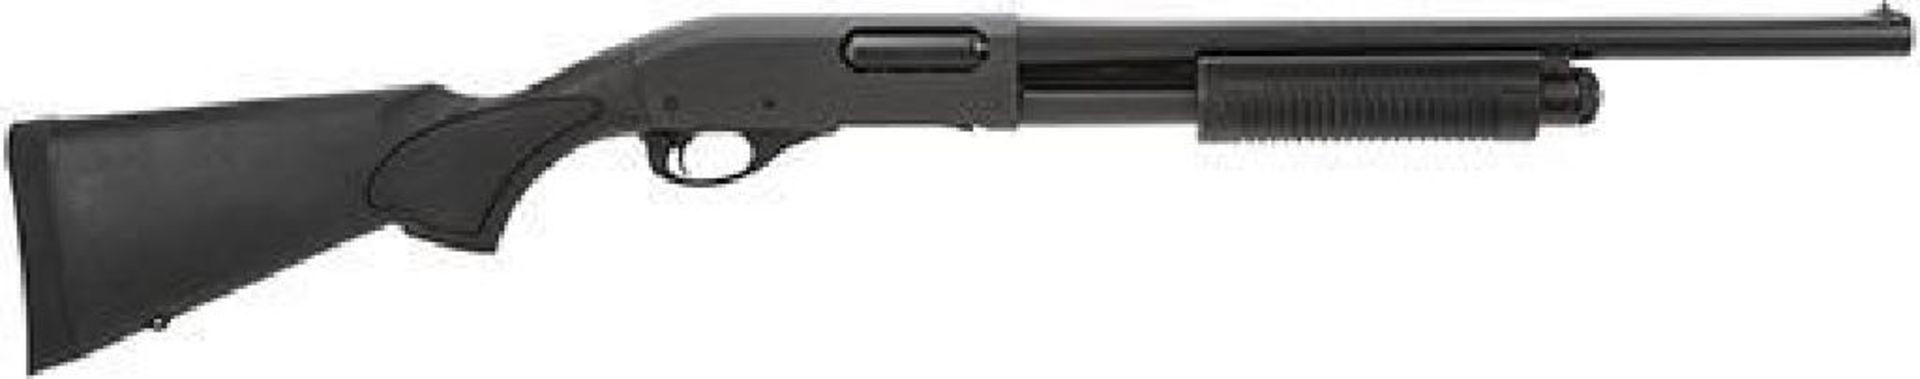 Product Description Remington tactical shotguns are rugged and ultra-dependable, and the Model 870